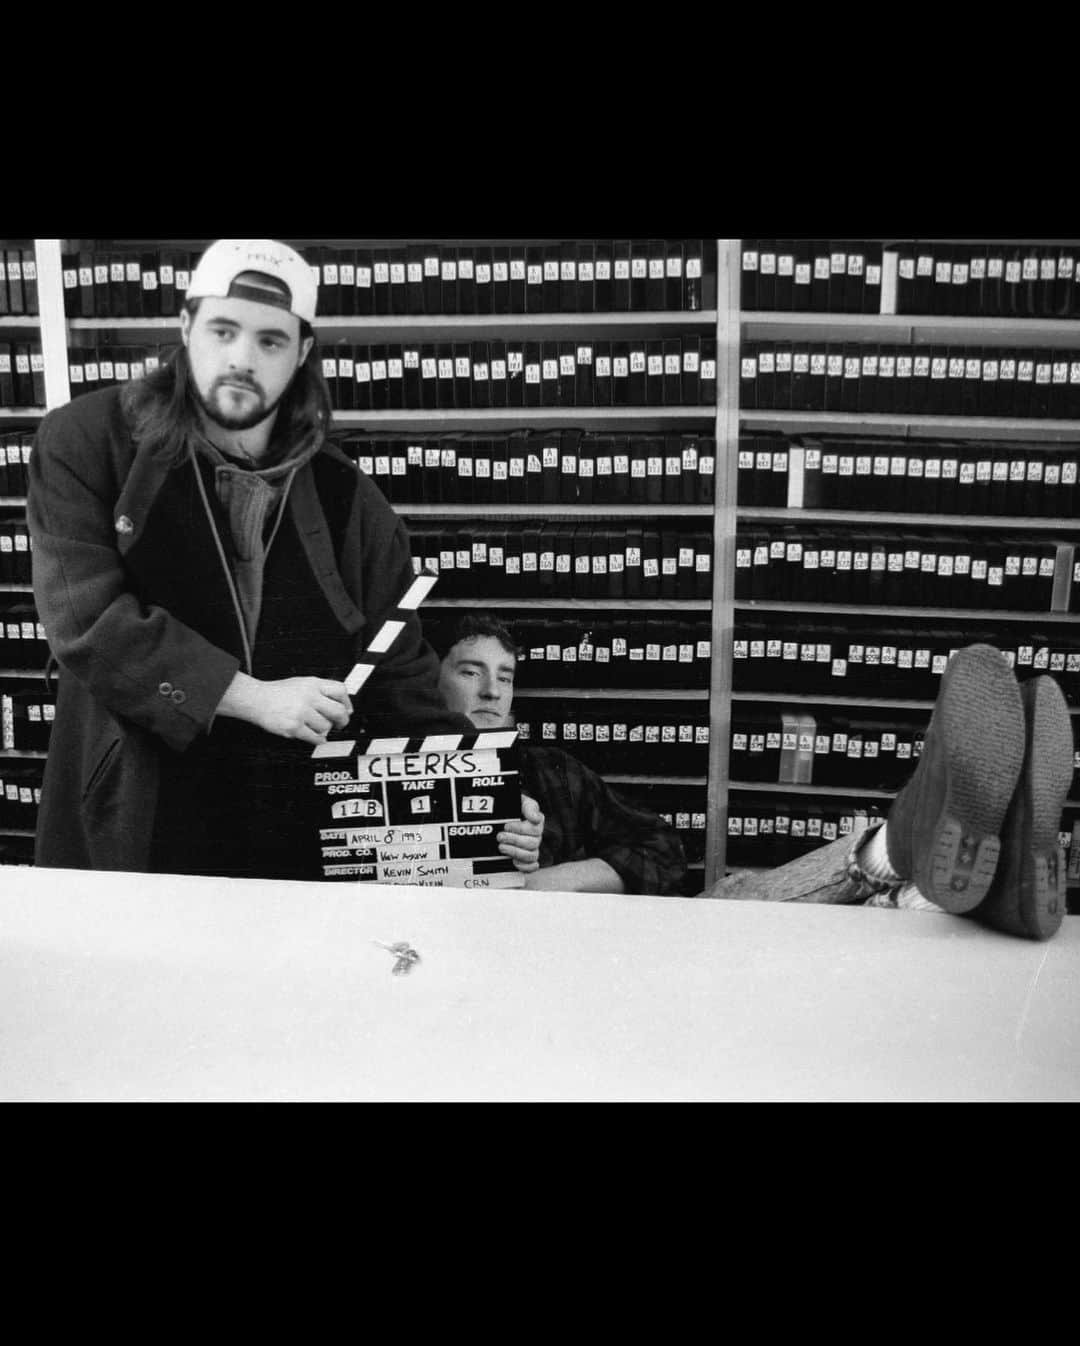 ケヴィン・スミスさんのインスタグラム写真 - (ケヴィン・スミスInstagram)「I started writing CLERKS III on December 28th and just finished the 101 page first draft last night! But the writing doesn’t begin when you start tapping the keys: I’ve been stirring this stew in my brain pan for awhile now. So when I sat down to put years of daydreaming into actual words, the typing part of the writing process was pretty brisk. Fake New Jersey (or what I’ve long called the View Askewniverse) has been so much more preferable to visit than the real world lately - but I’ve told the tale I wanted to tell, so it’s time to step back, hand the script off to a trusted few, and then tinker further based on the feedback. For those keeping score anymore, this is actually Clerks III v.2. I had written a different version of Clerks III about 6 years back - one which I’m now very happy we never made (although I used the opening scene for @jayandsilentbob Reboot). This is a much more personal story than the previous incarnation, drawing directly on the heart attack that nearly killed me (3 years ago next month). It was oddly triggering writing those scenes, as it was the first time in awhile I contemplated how close I came to shuffling lose this mortal coil. But far more than make me mindful of my own mortality, this script to Clerks III makes me laugh out loud. Dante, Randal, Elias, Becky, Jay and Silent Bob are all back, and the premise of the flick allows anyone who was in Clerks or Clerks II to return in some capacity. After a bummer of a 2020, this is how I want to spend some of 2021: at @quickstopgroceries in New Jersey where it all began, with friends and family. And when we finally roll cameras on Clerks III, I will know beyond the shadow of a doubt that I *am* supposed to be there that day! #KevinSmith #clerks3 #clerks #clerks2」1月14日 23時29分 - thatkevinsmith